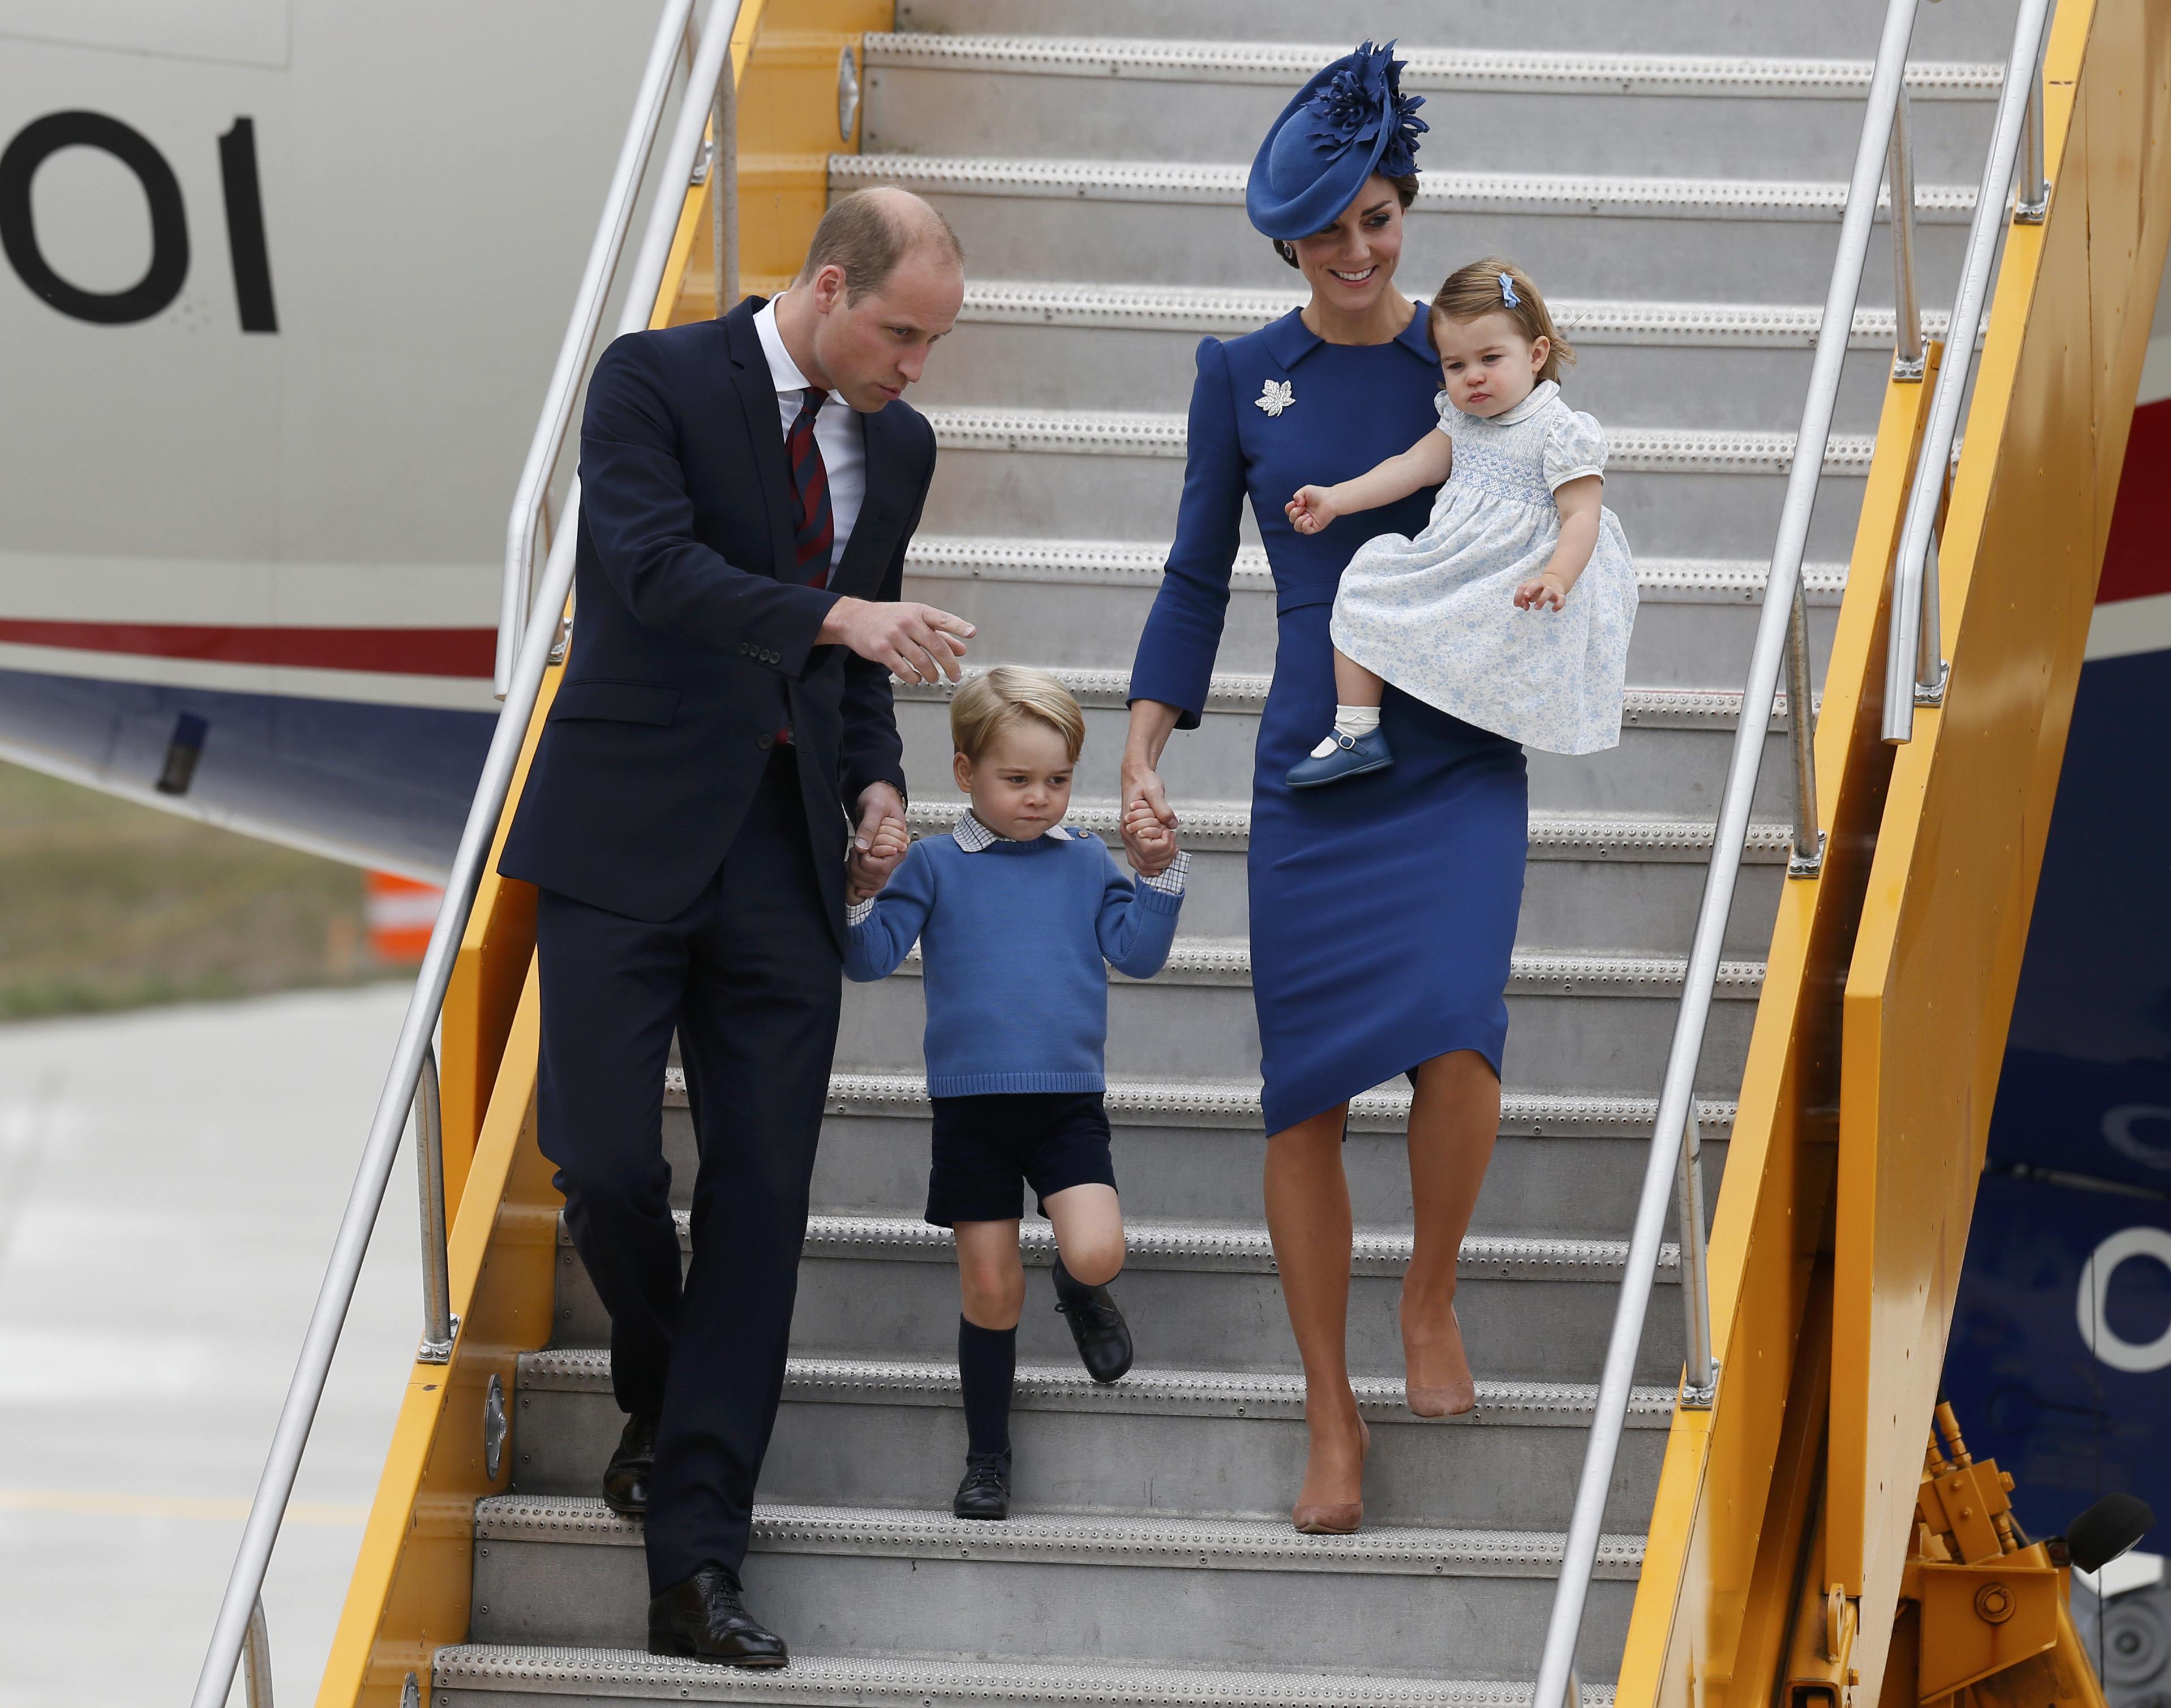 Britain's Prince William (L), Catherine, Duchess of Cambridge, Prince George (2nd L) and Princess Charlotte arrive at the Victoria International Airport for the start of their eight day royal tour to Canada in Victoria, British Columbia, Canada, September